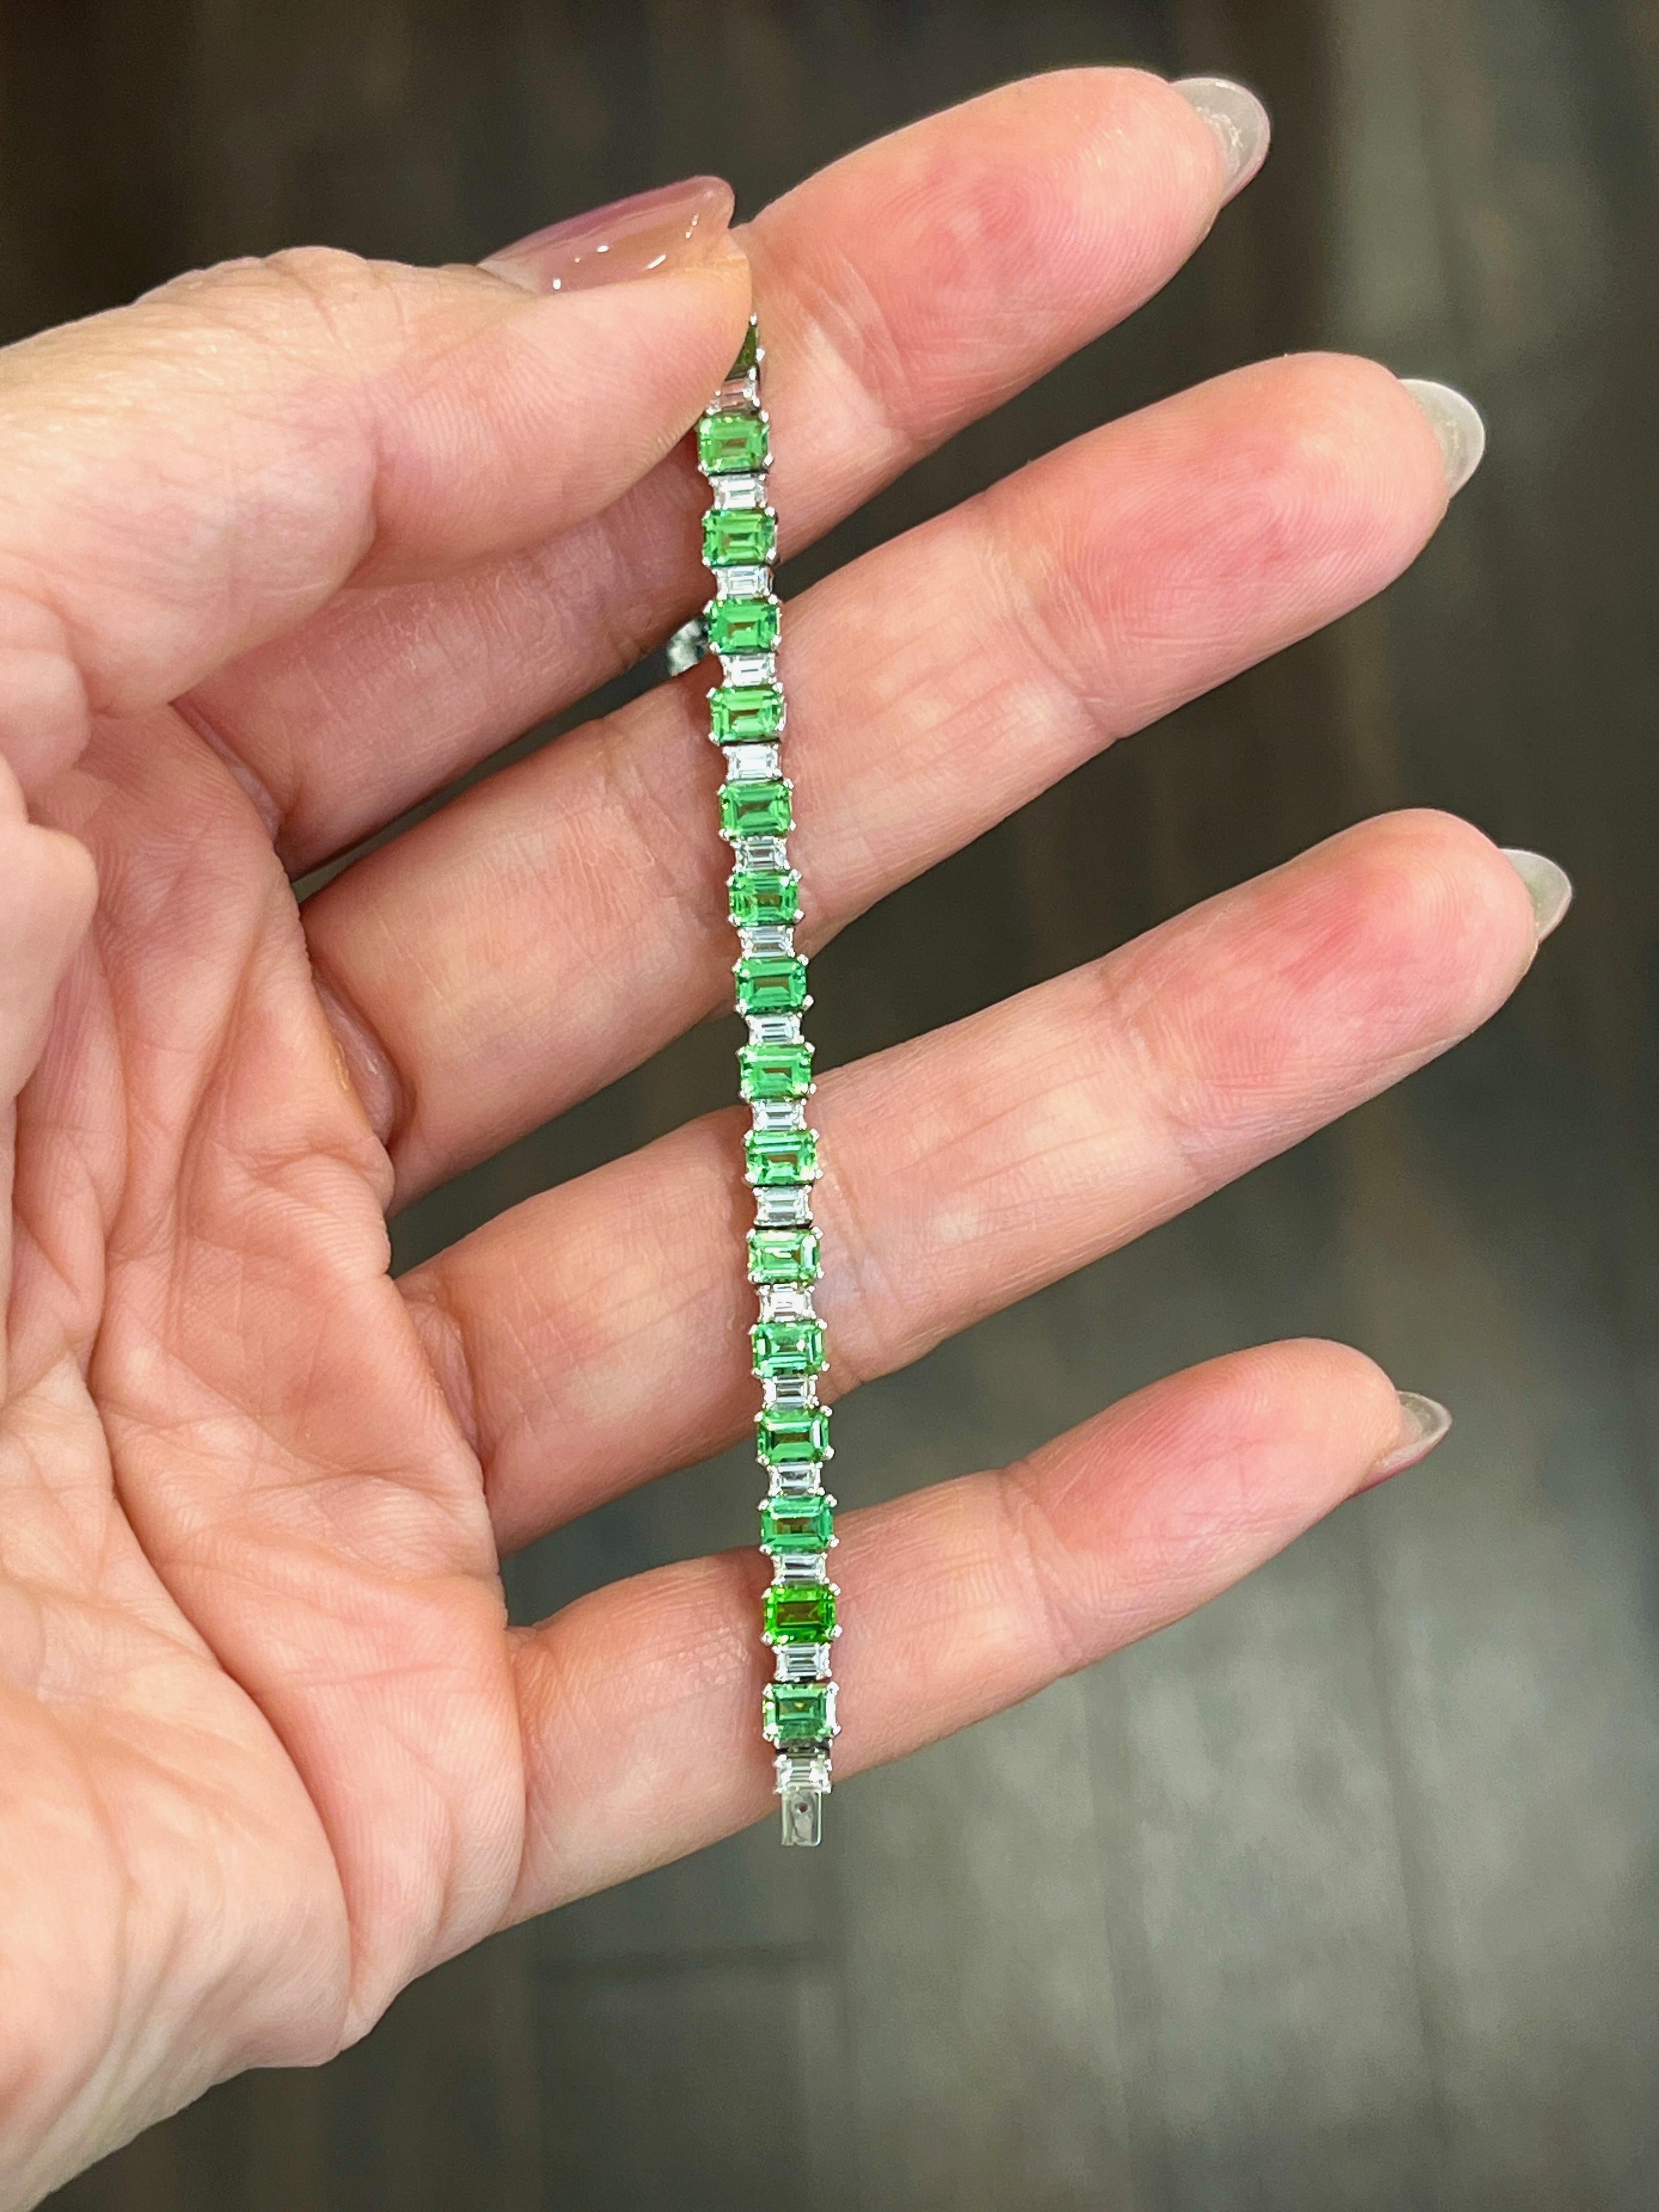 This gorgeous natural green garnet and diamond ring weighs 9.99 ct. This ring features 35 garnets at 8.19 ct and 35 diamonds at 1.80 ct. The diamonds are E/F in color and VS1/VS2 in clarity. 